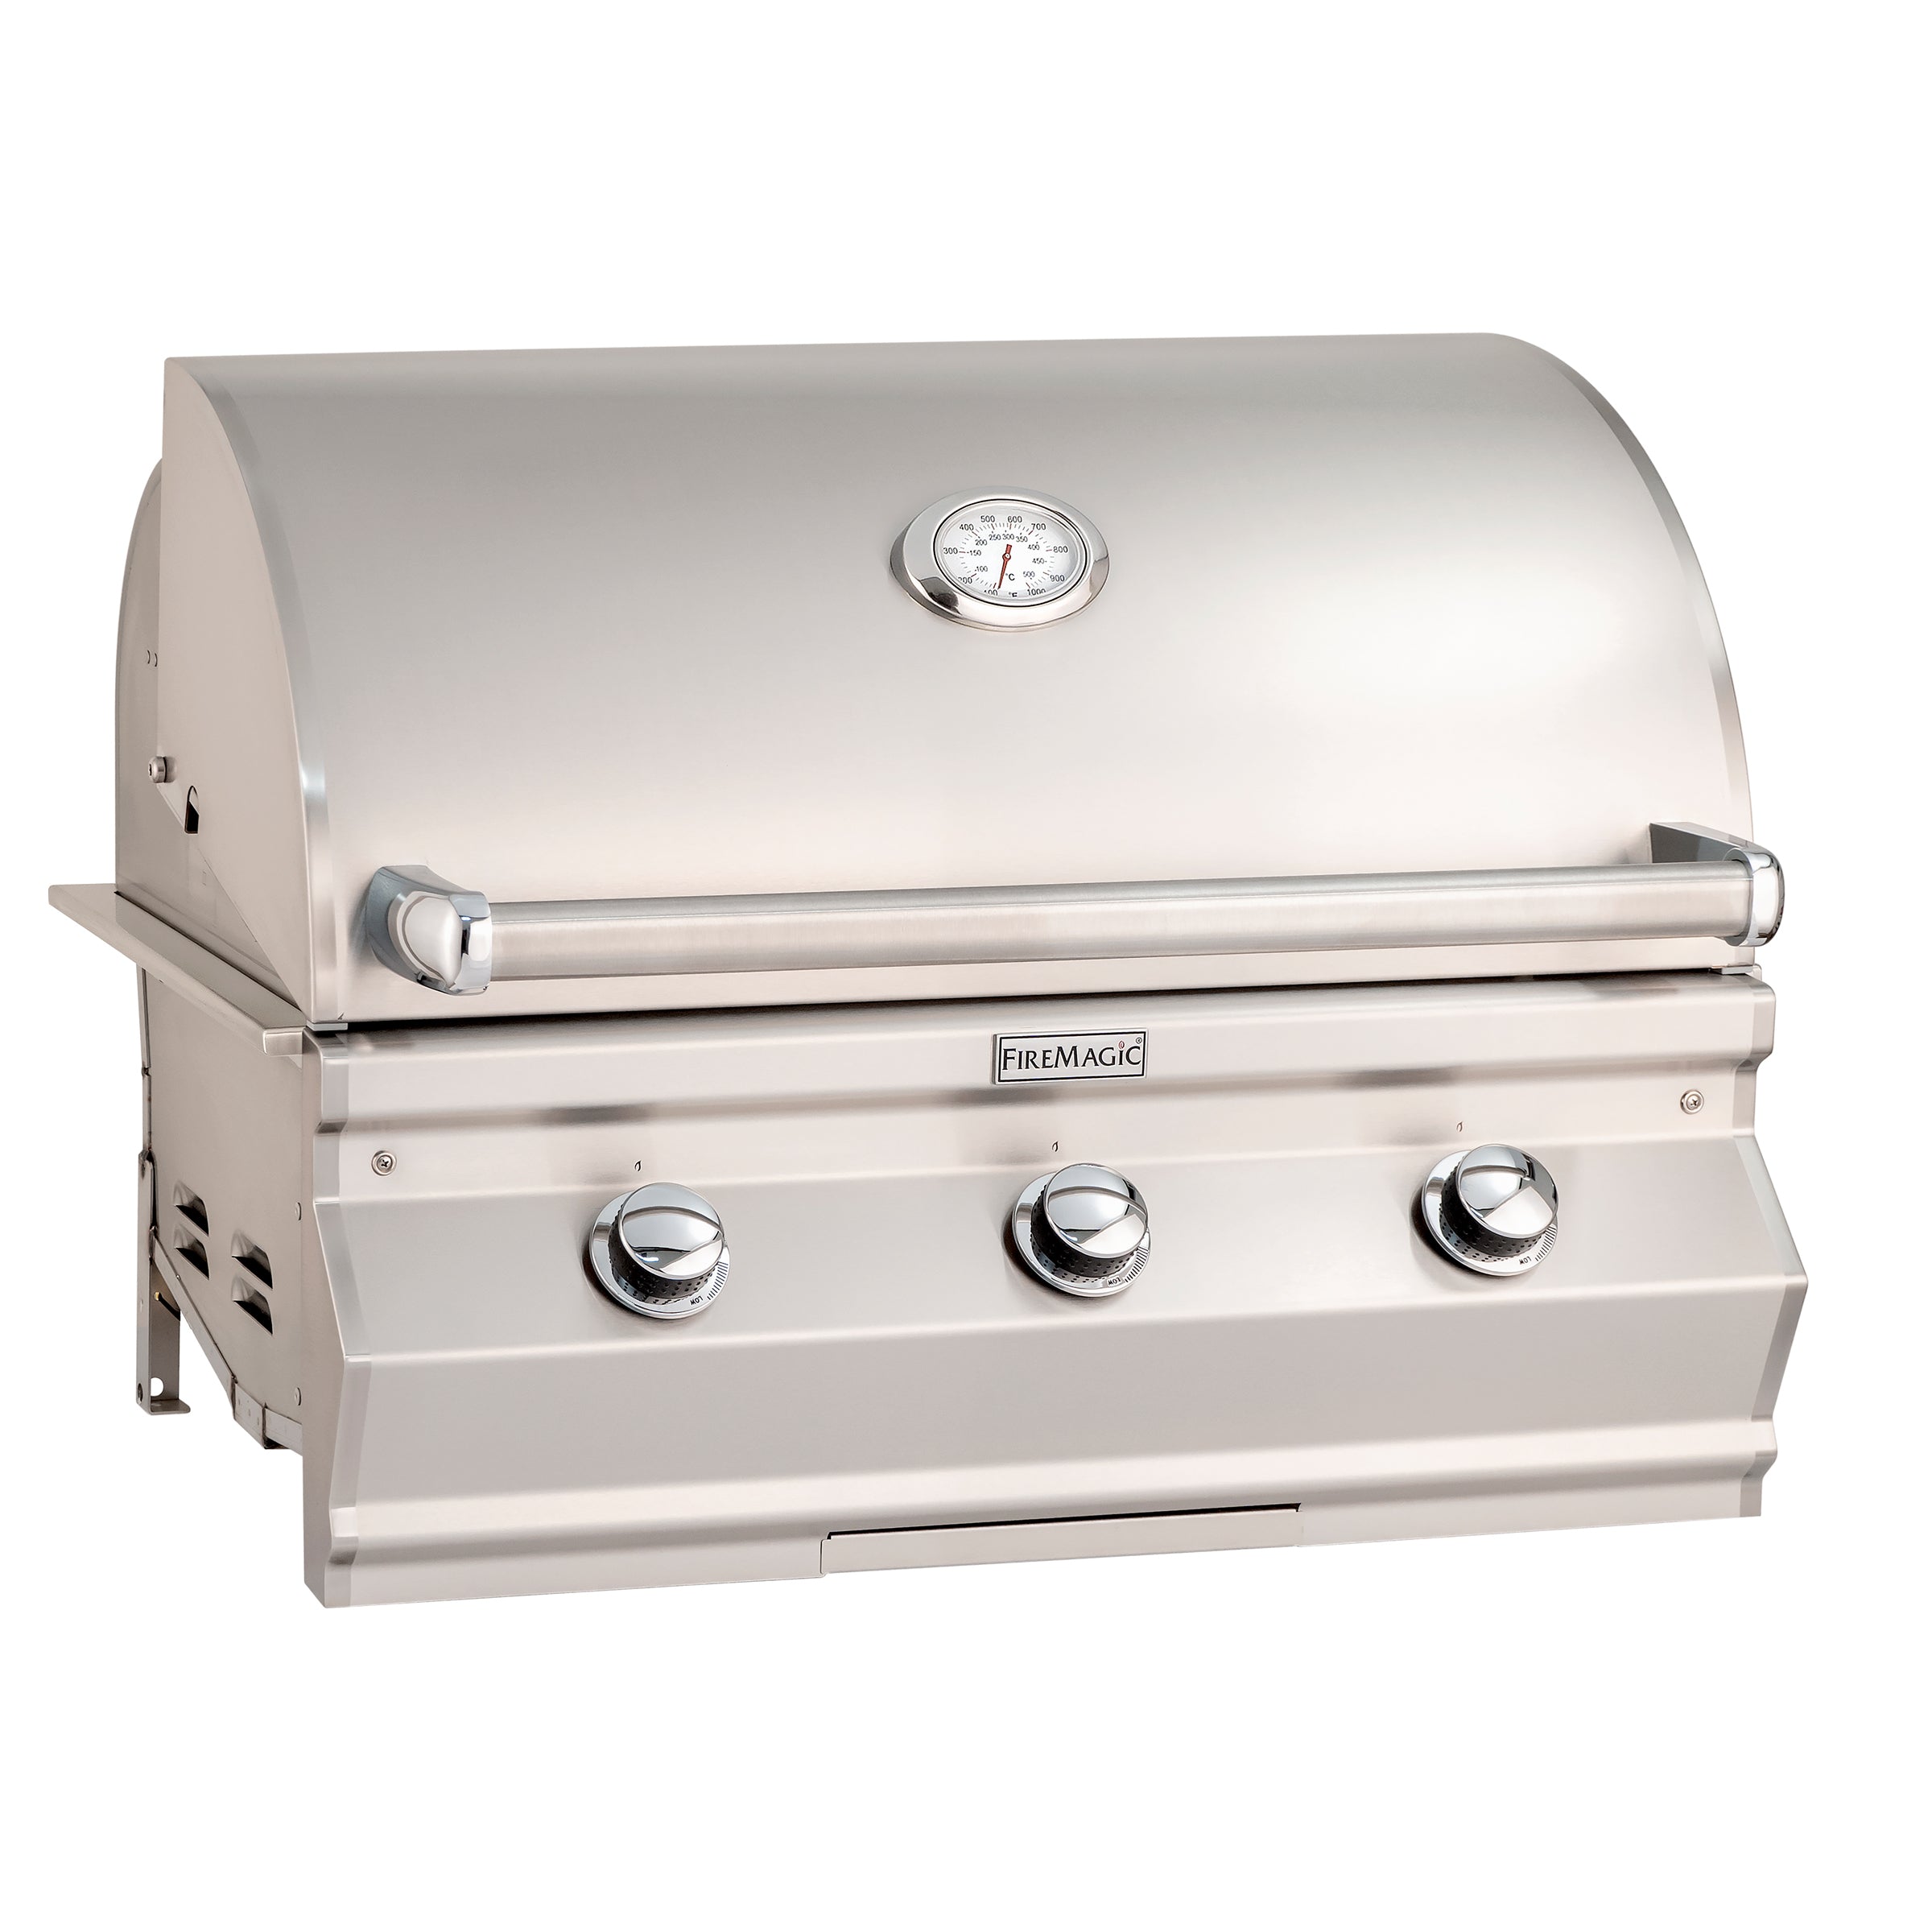 Fire Magic Choice C540i Built-In Grill with Analog Thermometer